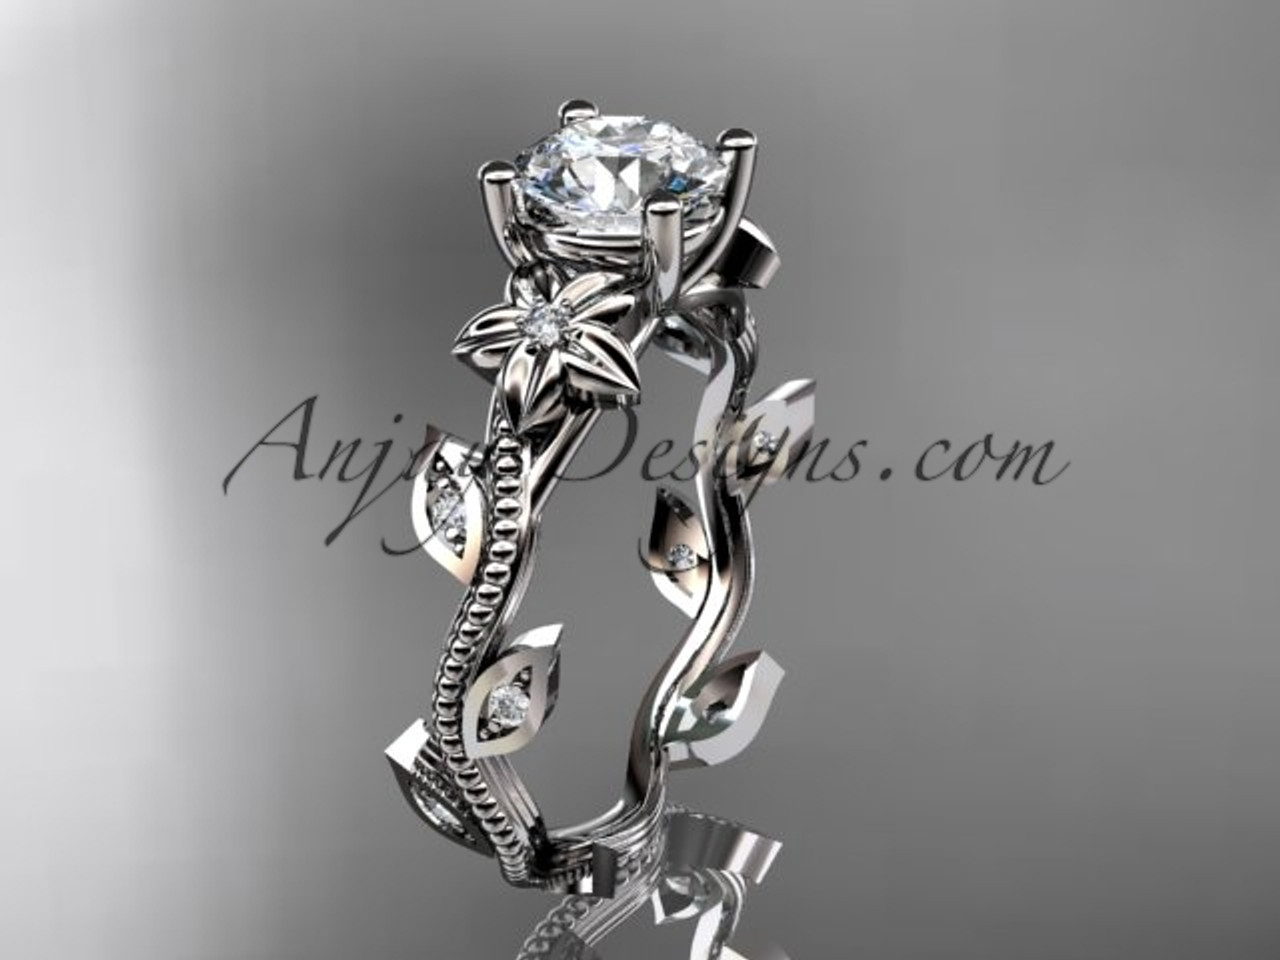 White Gold Diamond Rings - Wedding and Engagement Rings